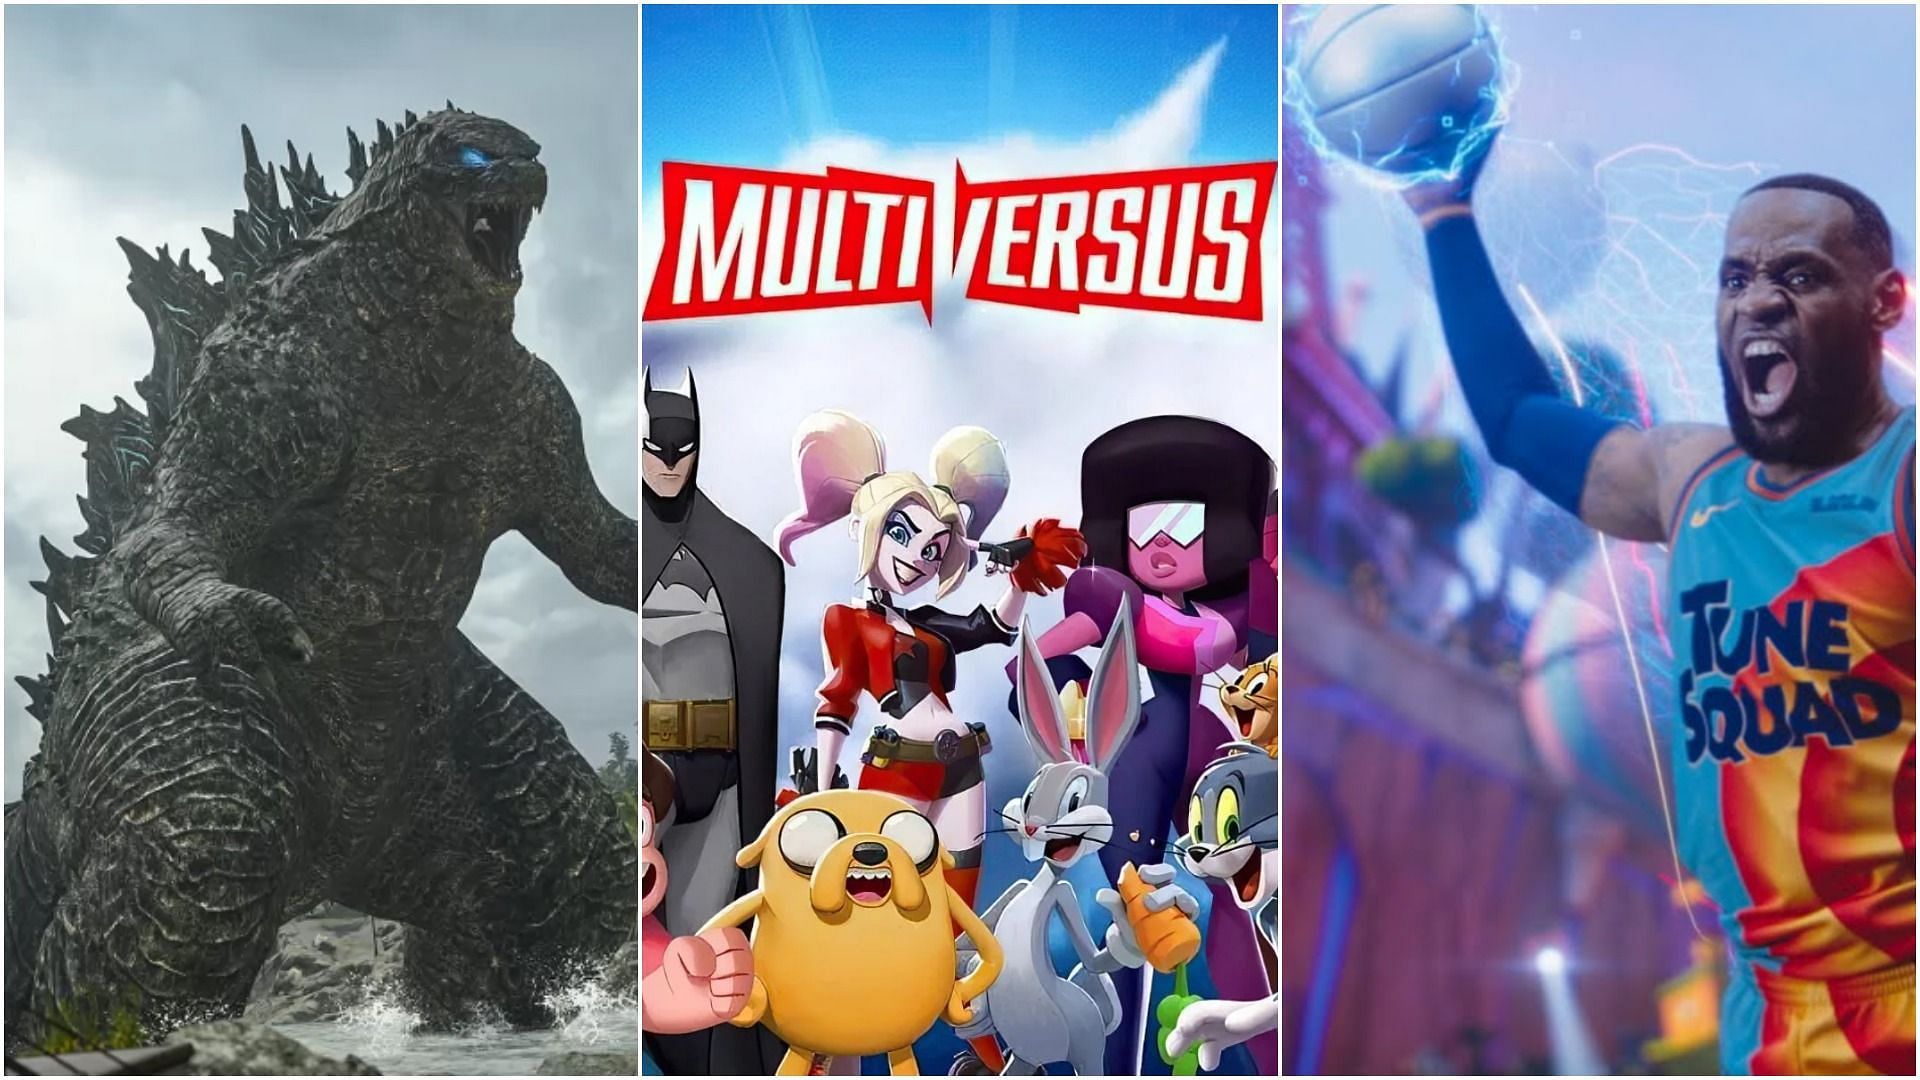 MultiVersus will contain several characters from Warner Bros. (Images via Activision, WB)